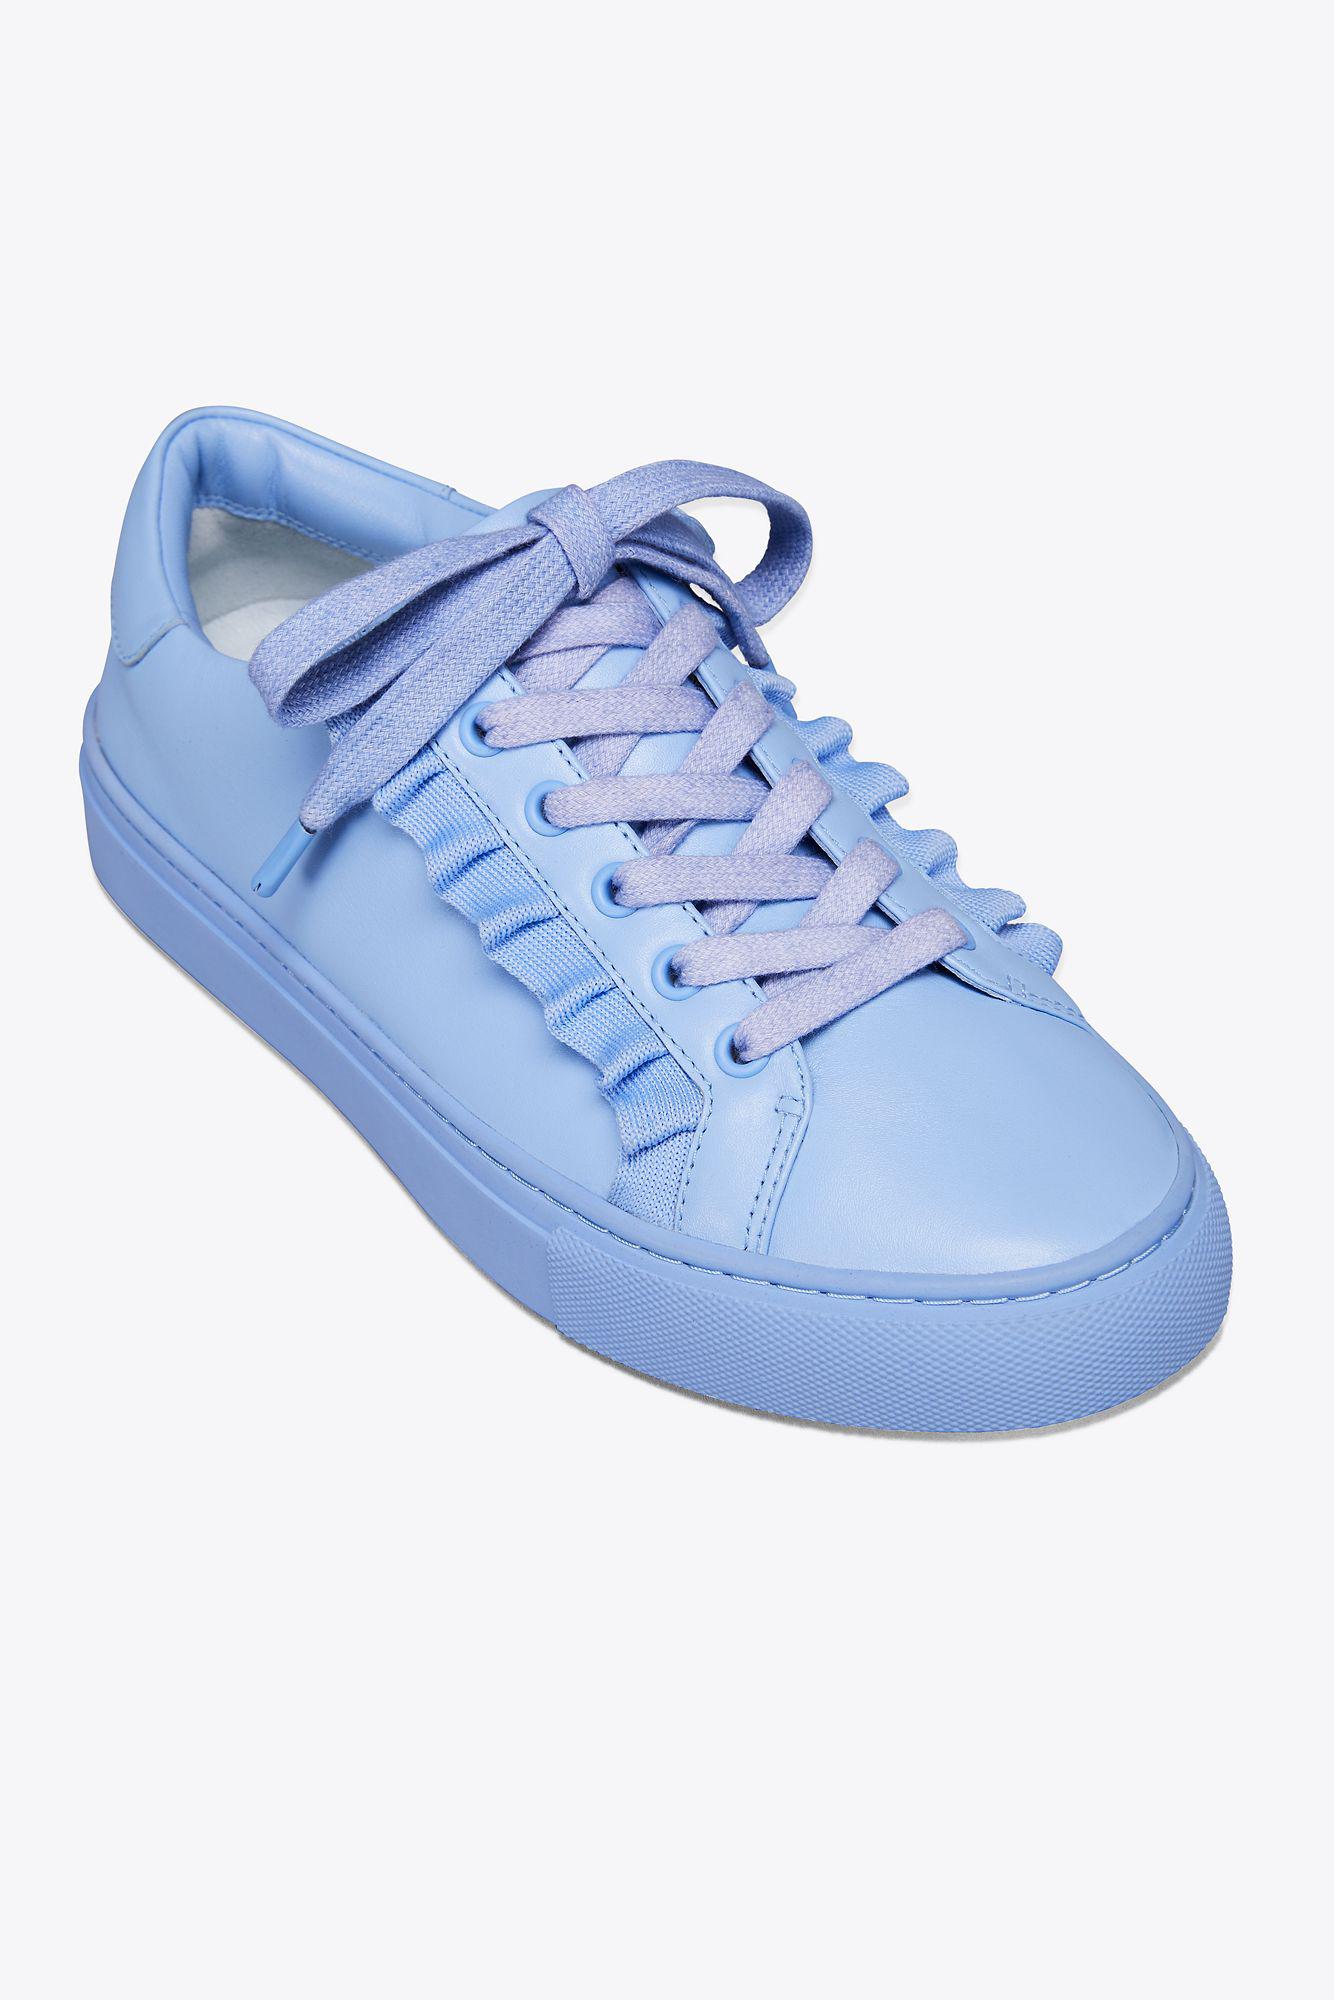 Tory Sport Women's Ruffle Leather Lace Up Sneakers in Blue - Lyst